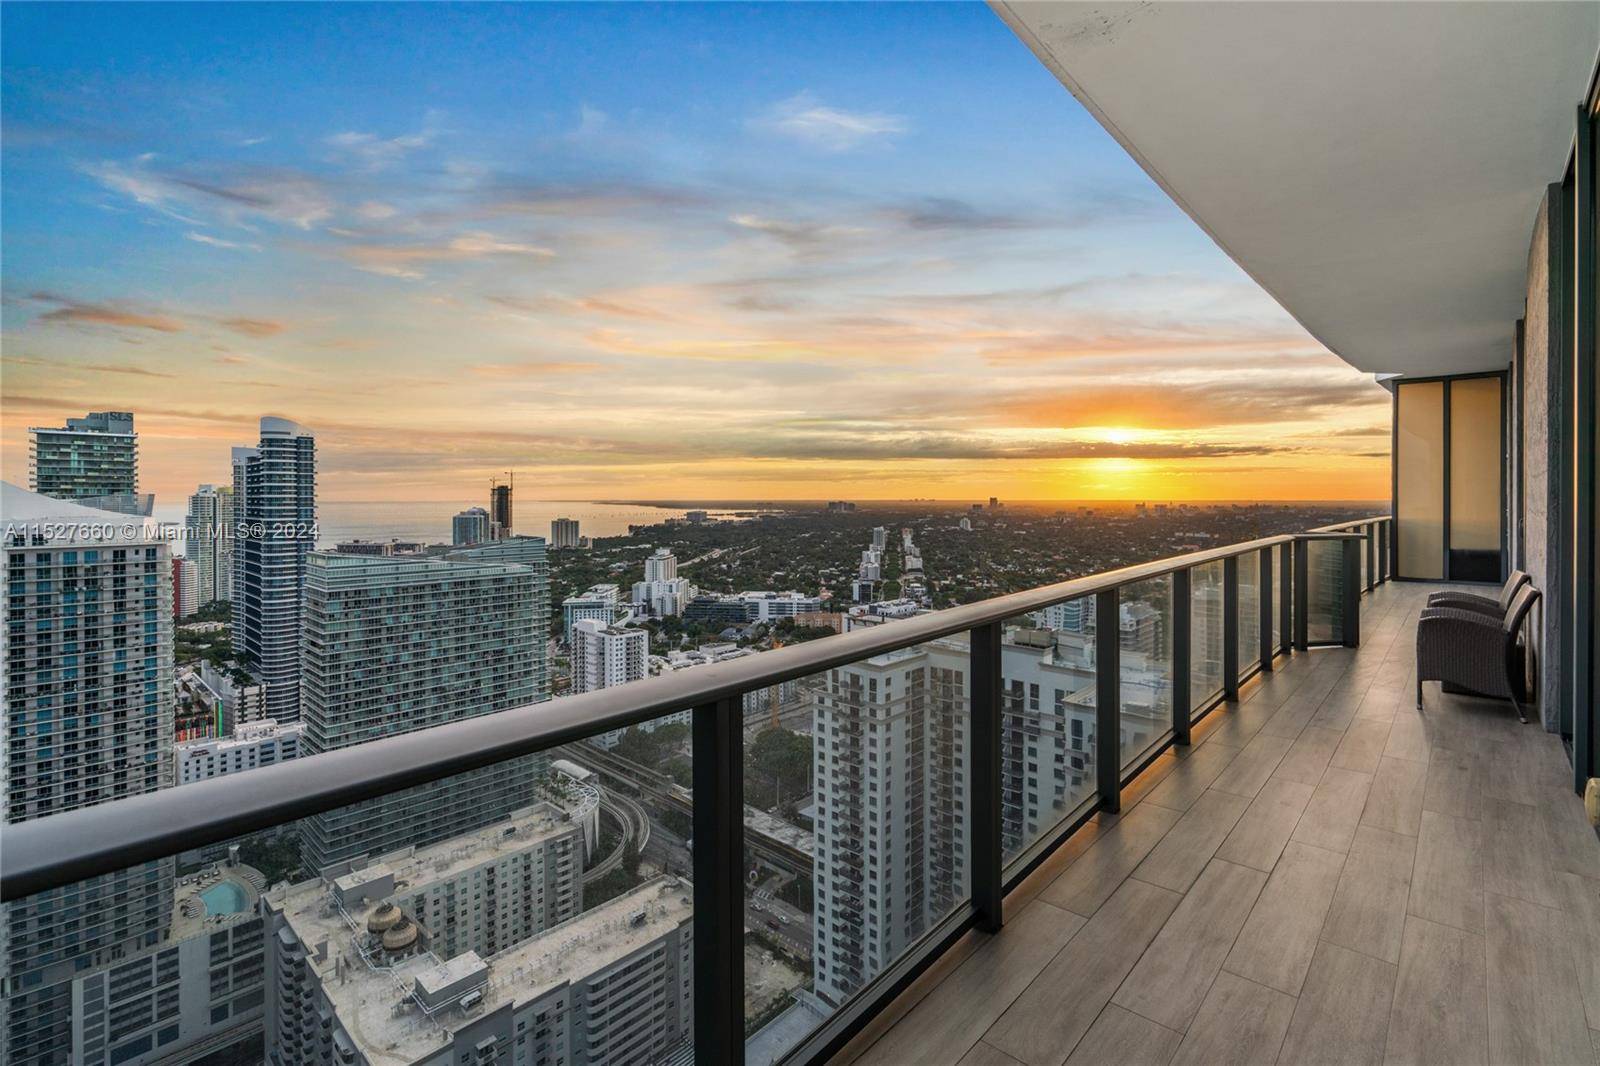 This Lower Penthouse at Brickell Heights East Tower is an exquisite residence, featuring 3 bedrooms and a convertible den, 4 full bathrooms, and breathtaking views of Biscayne Bay and the ...